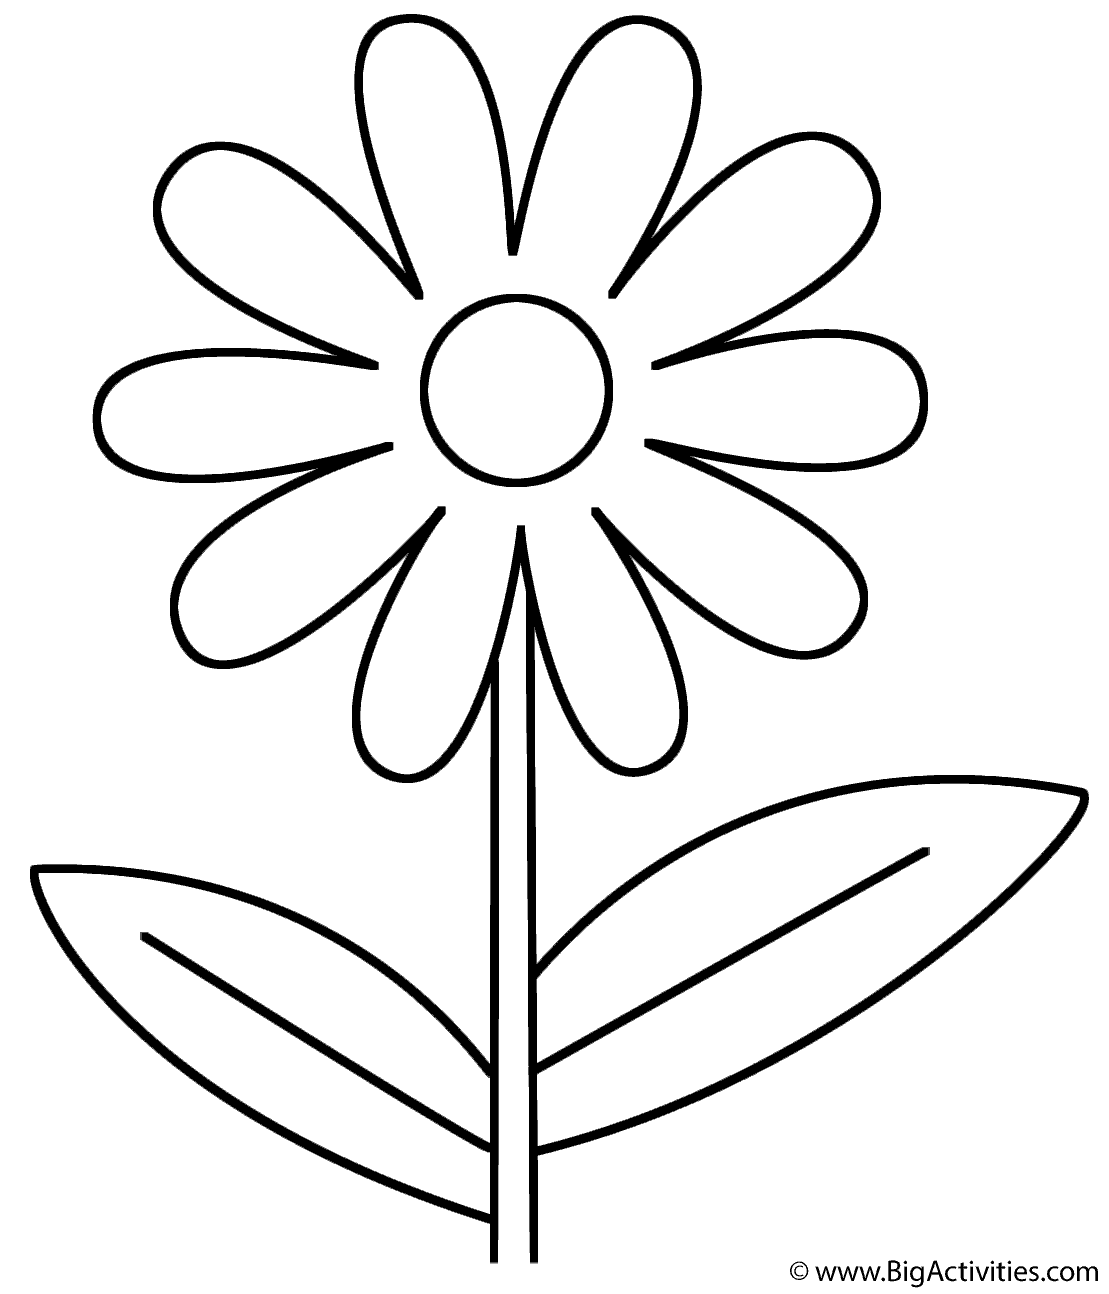 Flower - Coloring Page (Plants)